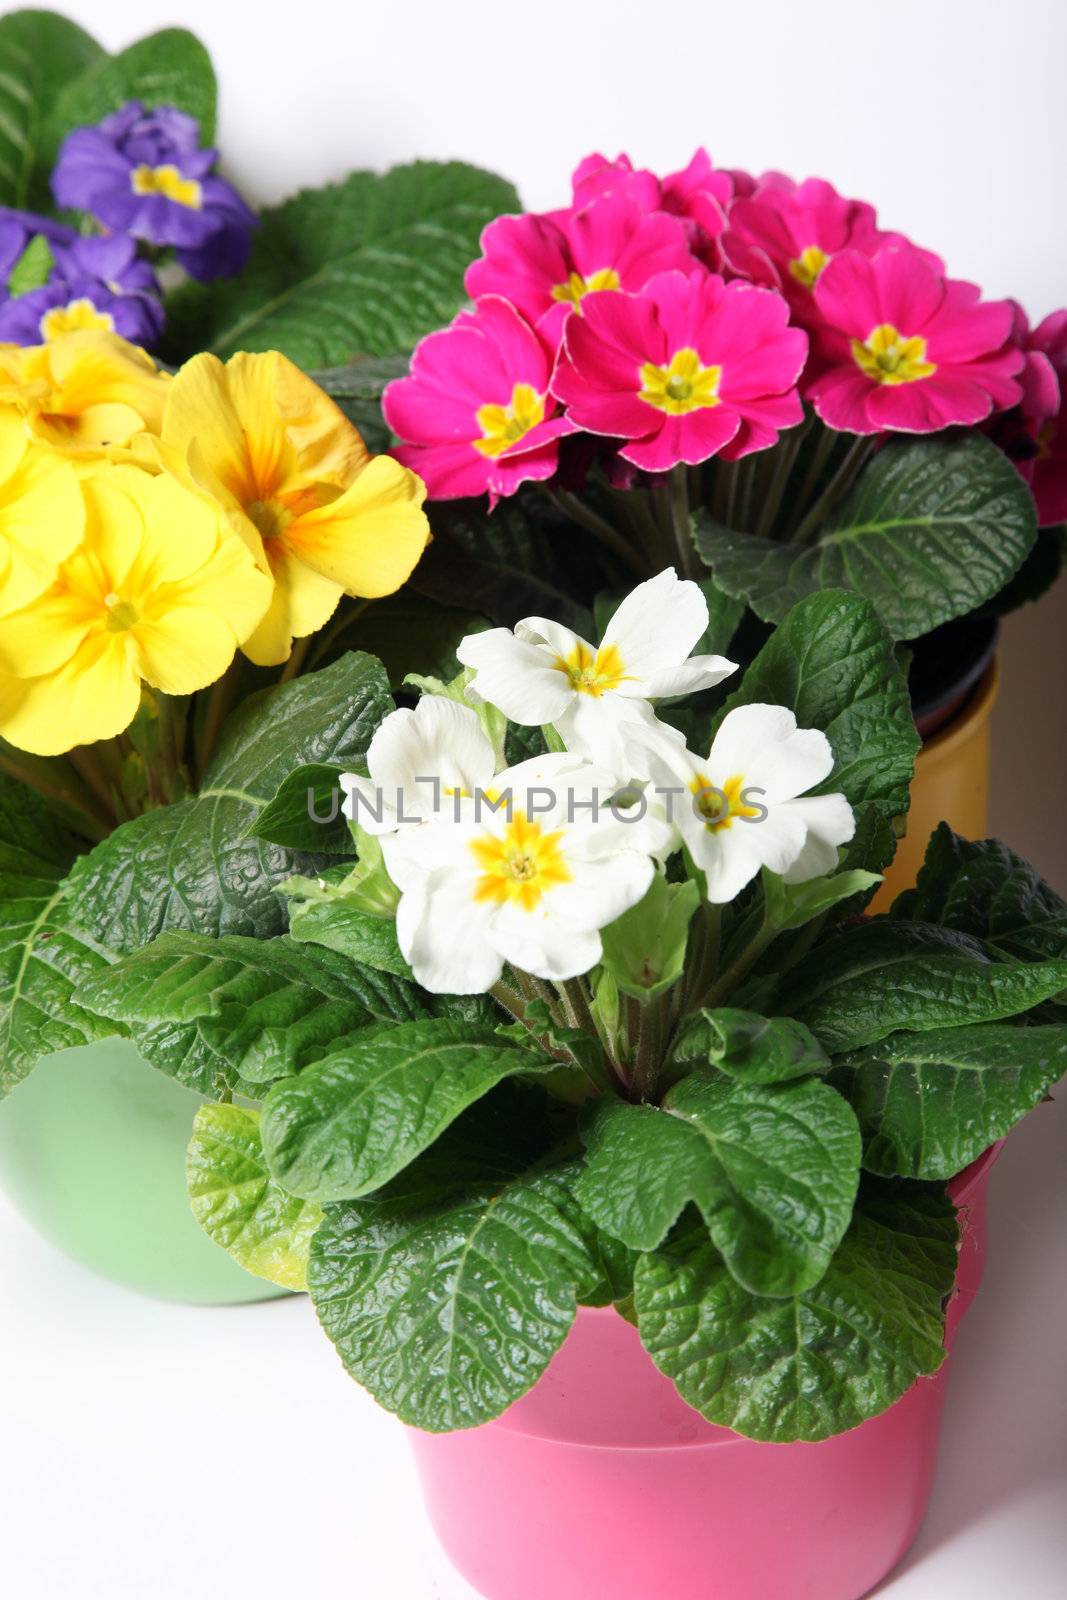 Colorful primroses in colorful pots by Farina6000